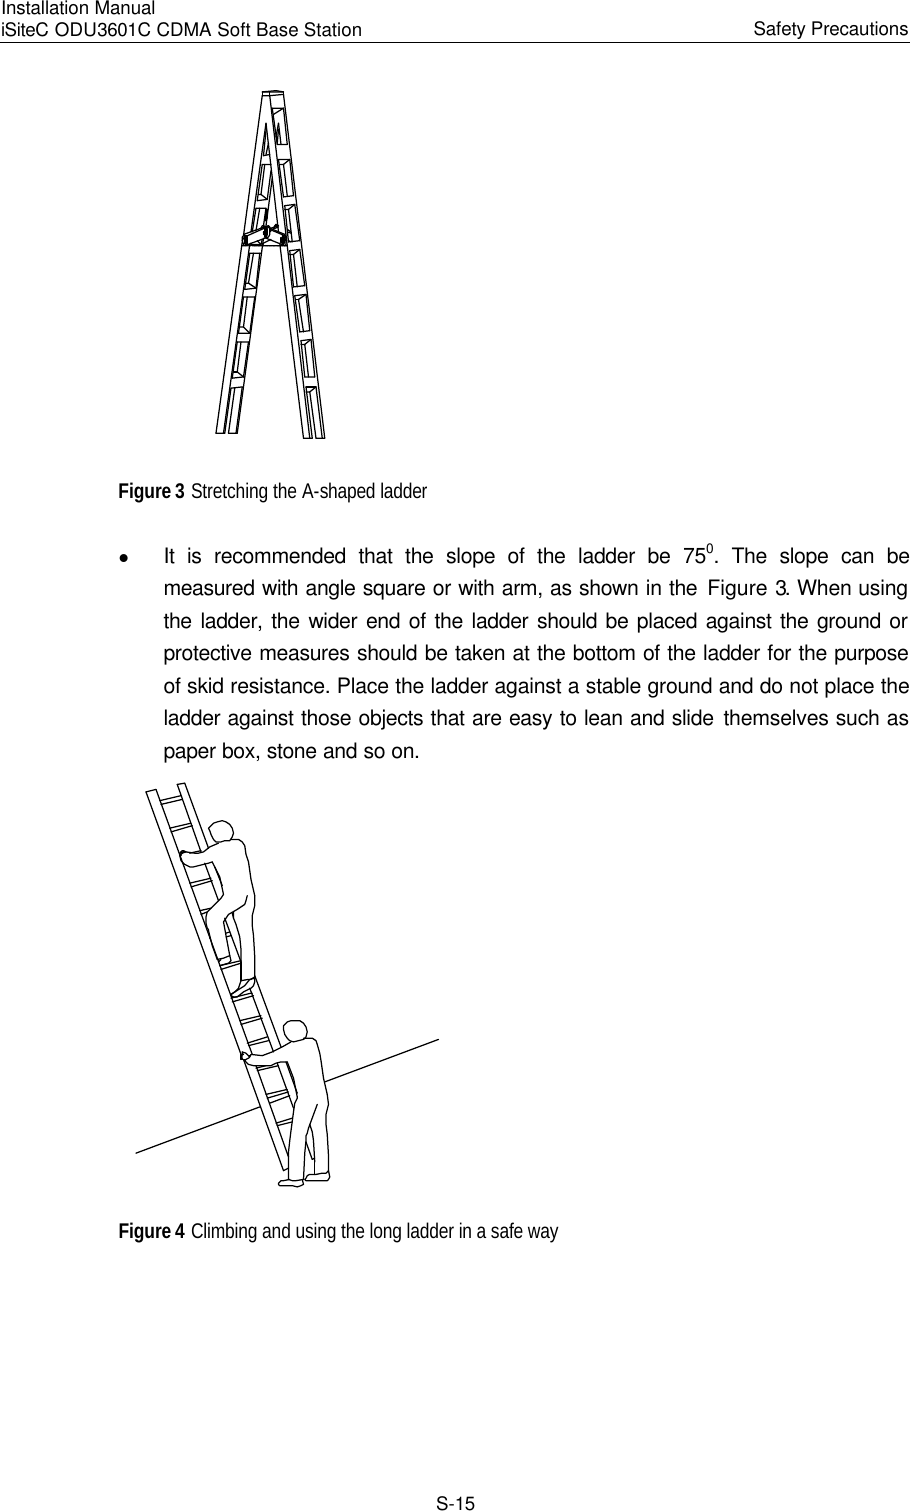 Installation Manual   iSiteC ODU3601C CDMA Soft Base Station Safety Precautions　S-15  Figure 3 Stretching the A-shaped ladder   l It is recommended that the slope of the ladder be 750. The slope can be measured with angle square or with arm, as shown in the Figure 3. When using the ladder, the wider end of the ladder should be placed against the ground or protective measures should be taken at the bottom of the ladder for the purpose of skid resistance. Place the ladder against a stable ground and do not place the ladder against those objects that are easy to lean and slide themselves such as paper box, stone and so on.  Figure 4 Climbing and using the long ladder in a safe way 